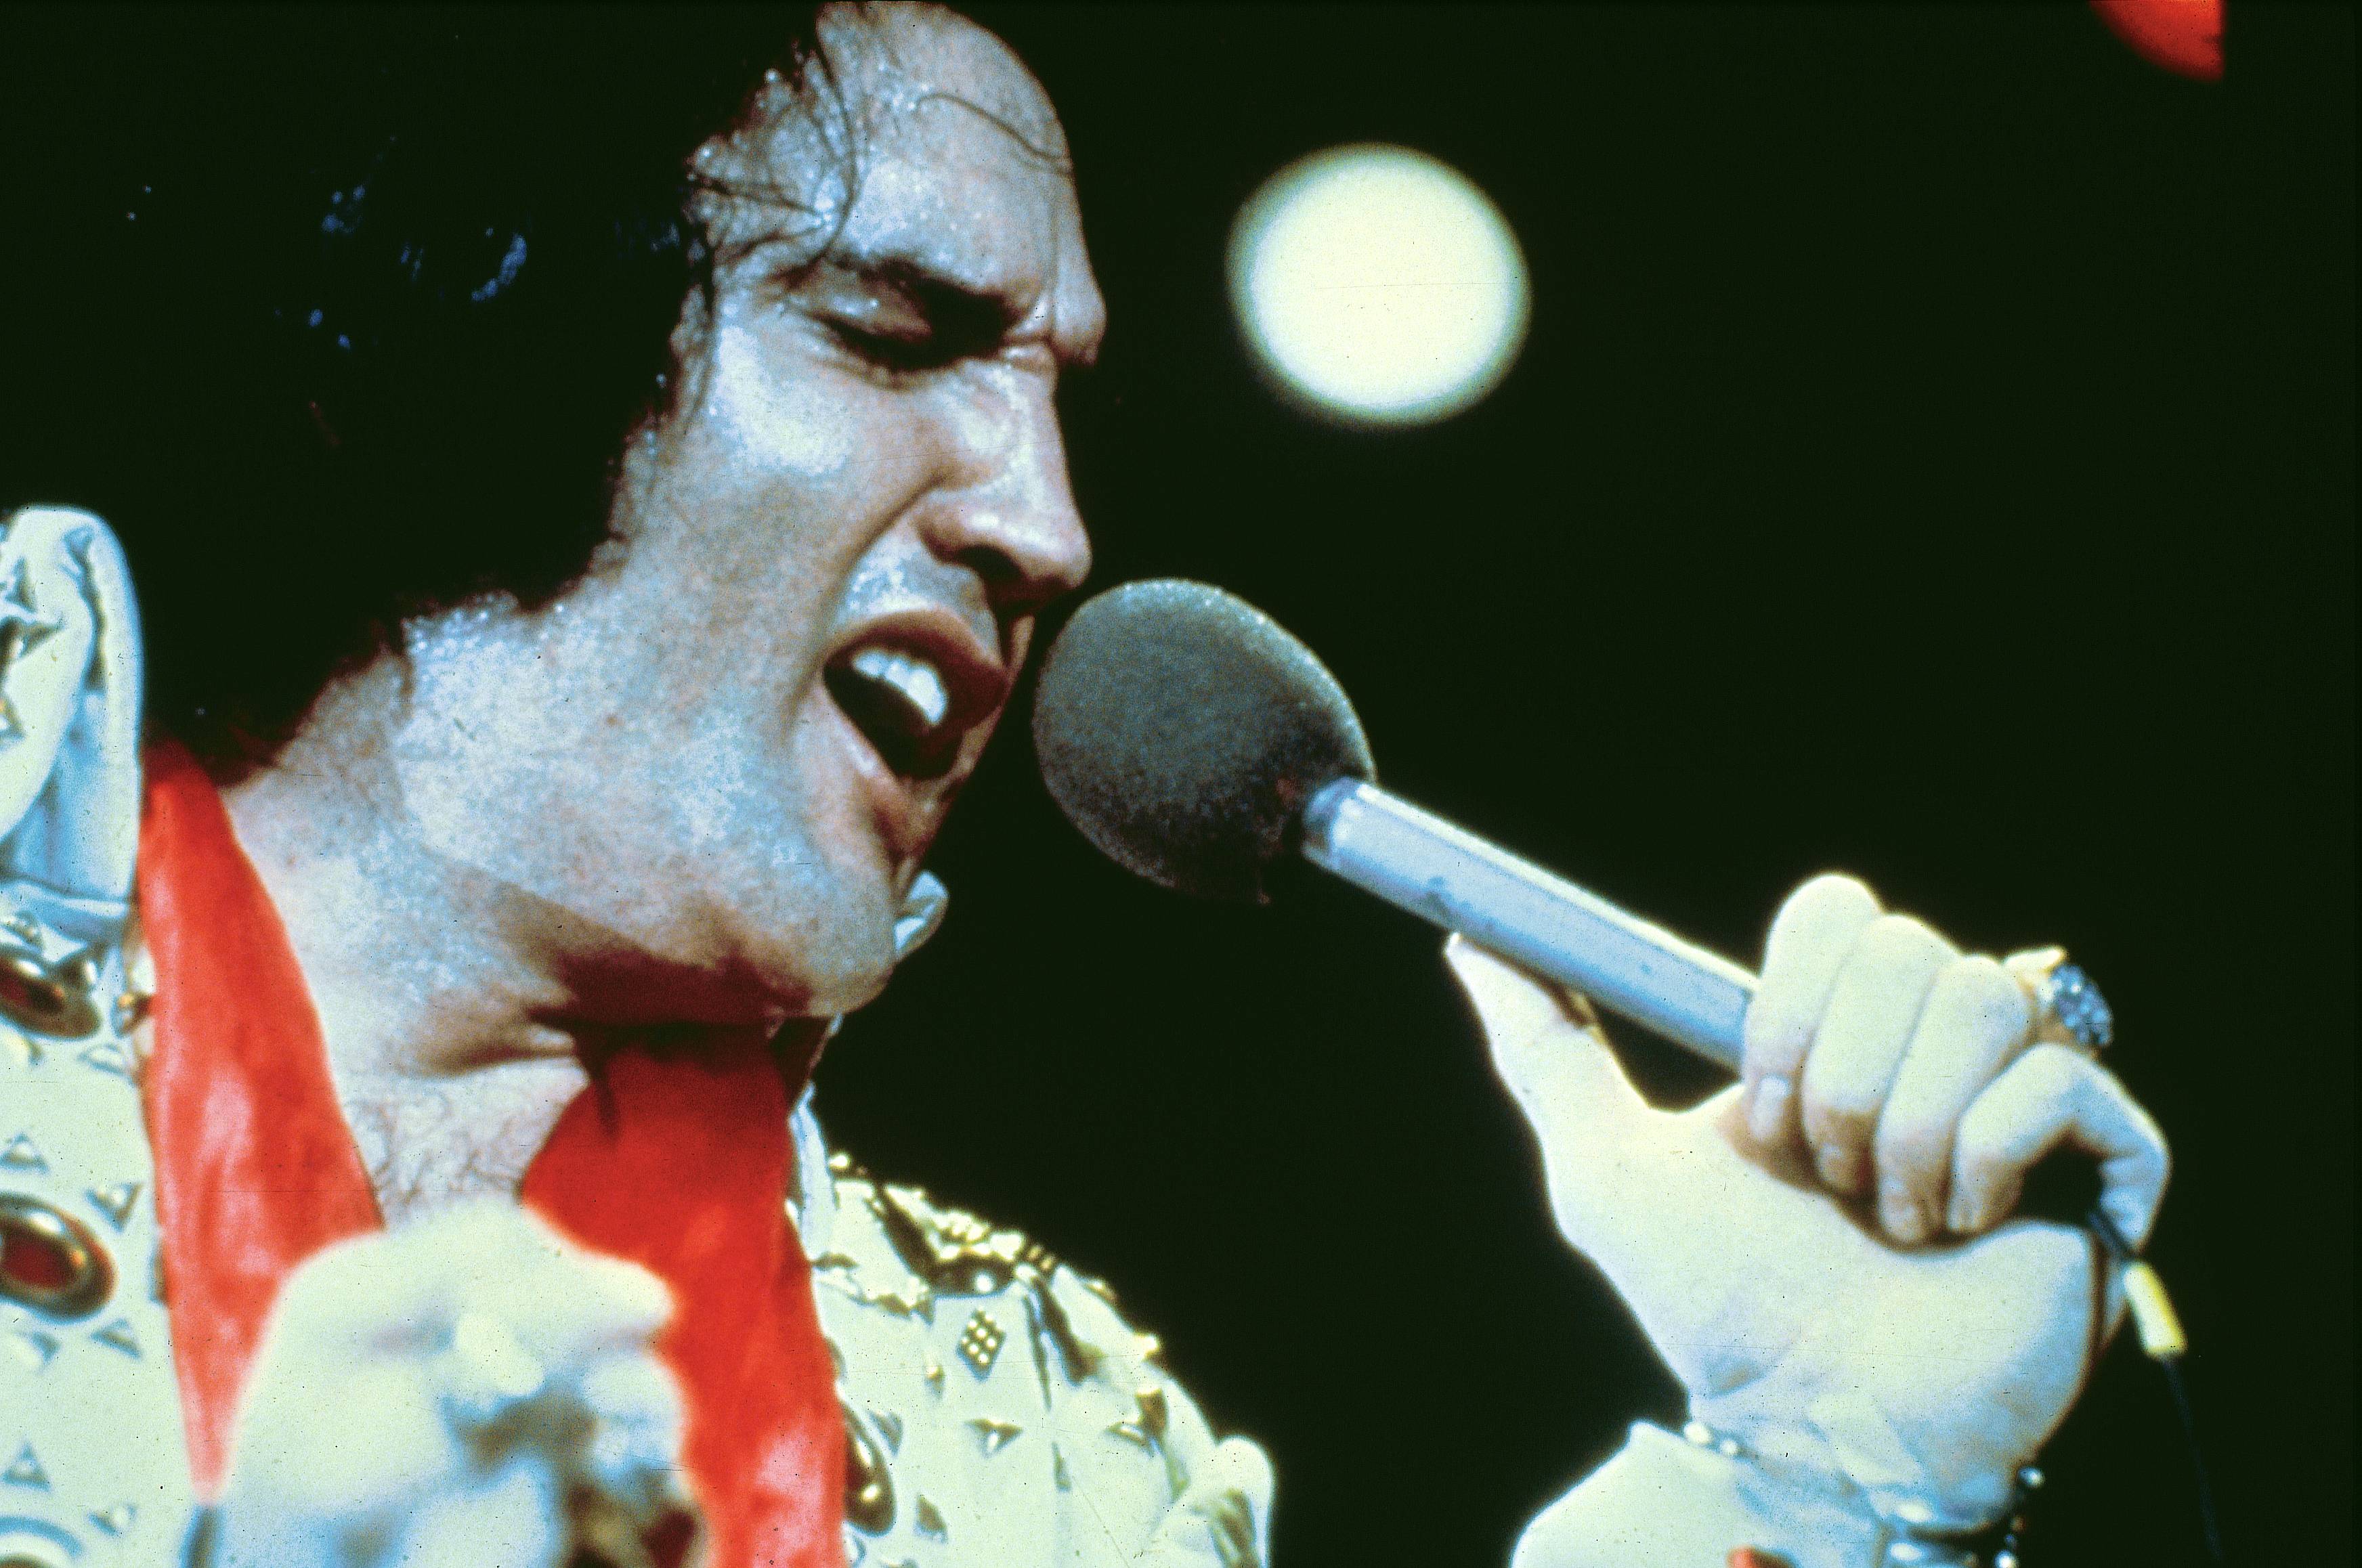 "Burning Love" era Elvis Presley with a microphone